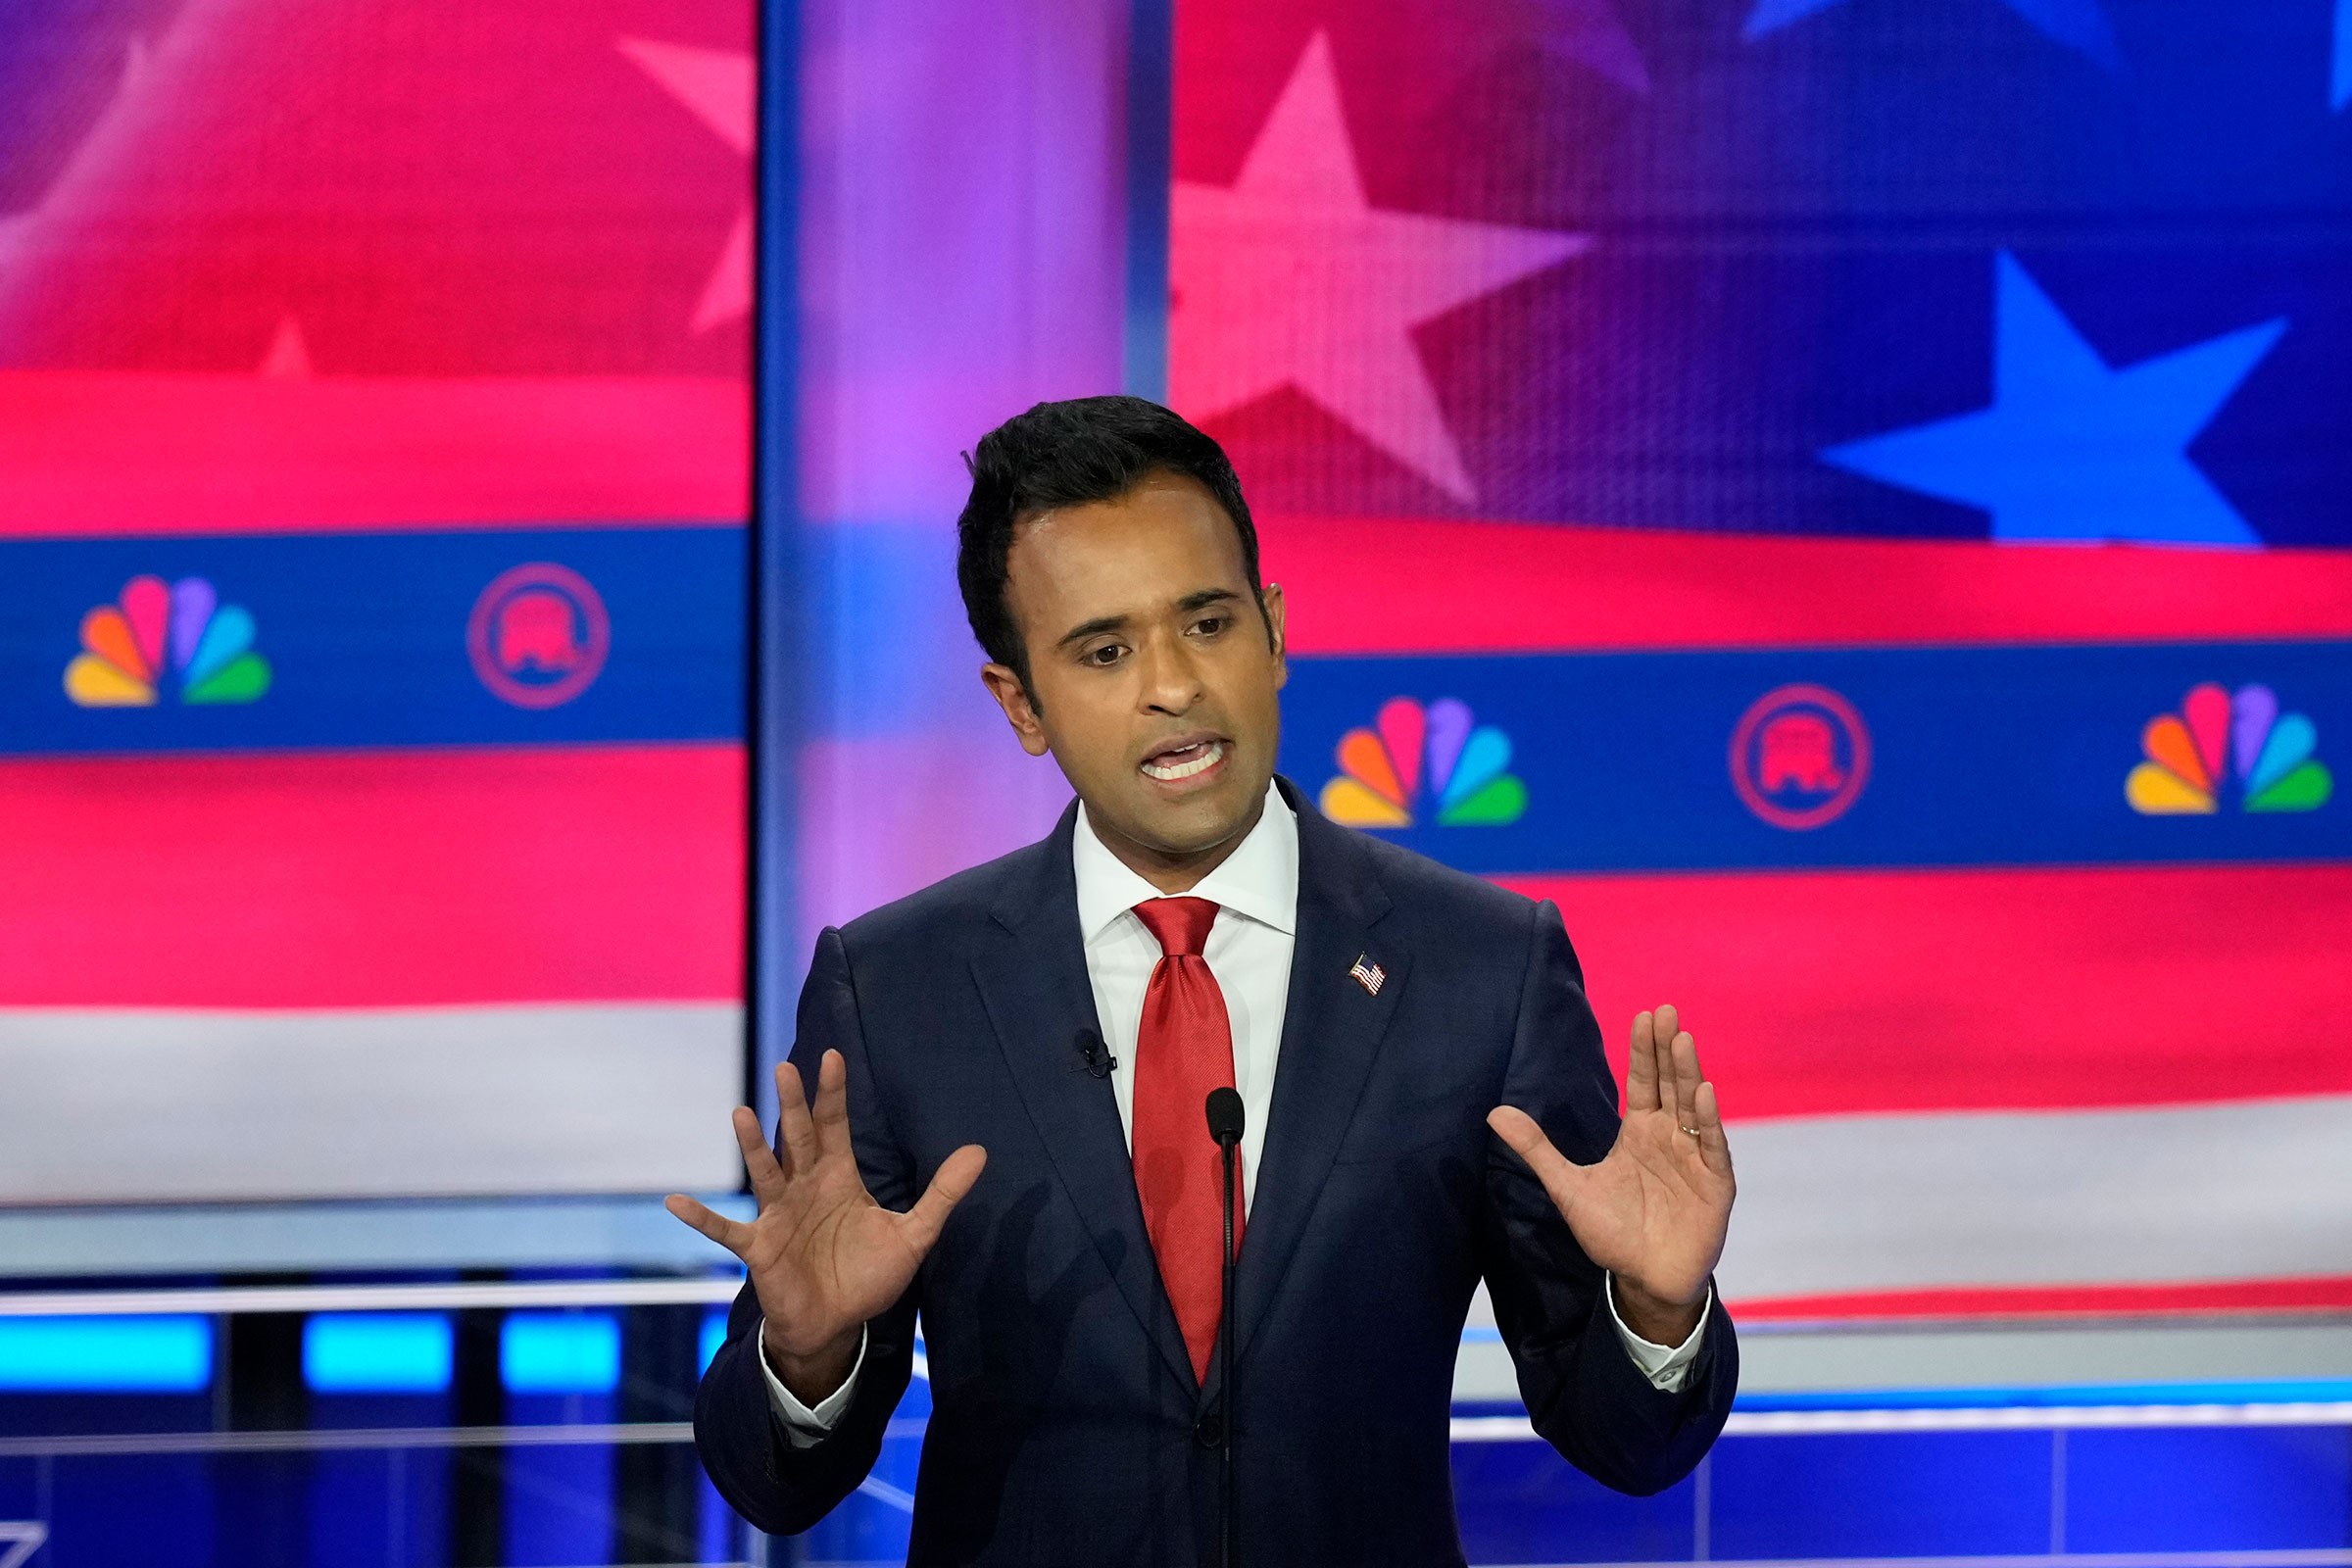 Entrepreneur Vivek Ramaswamy speaks during a Republican presidential primary debate hosted by NBC News on Wednesday in Miami.